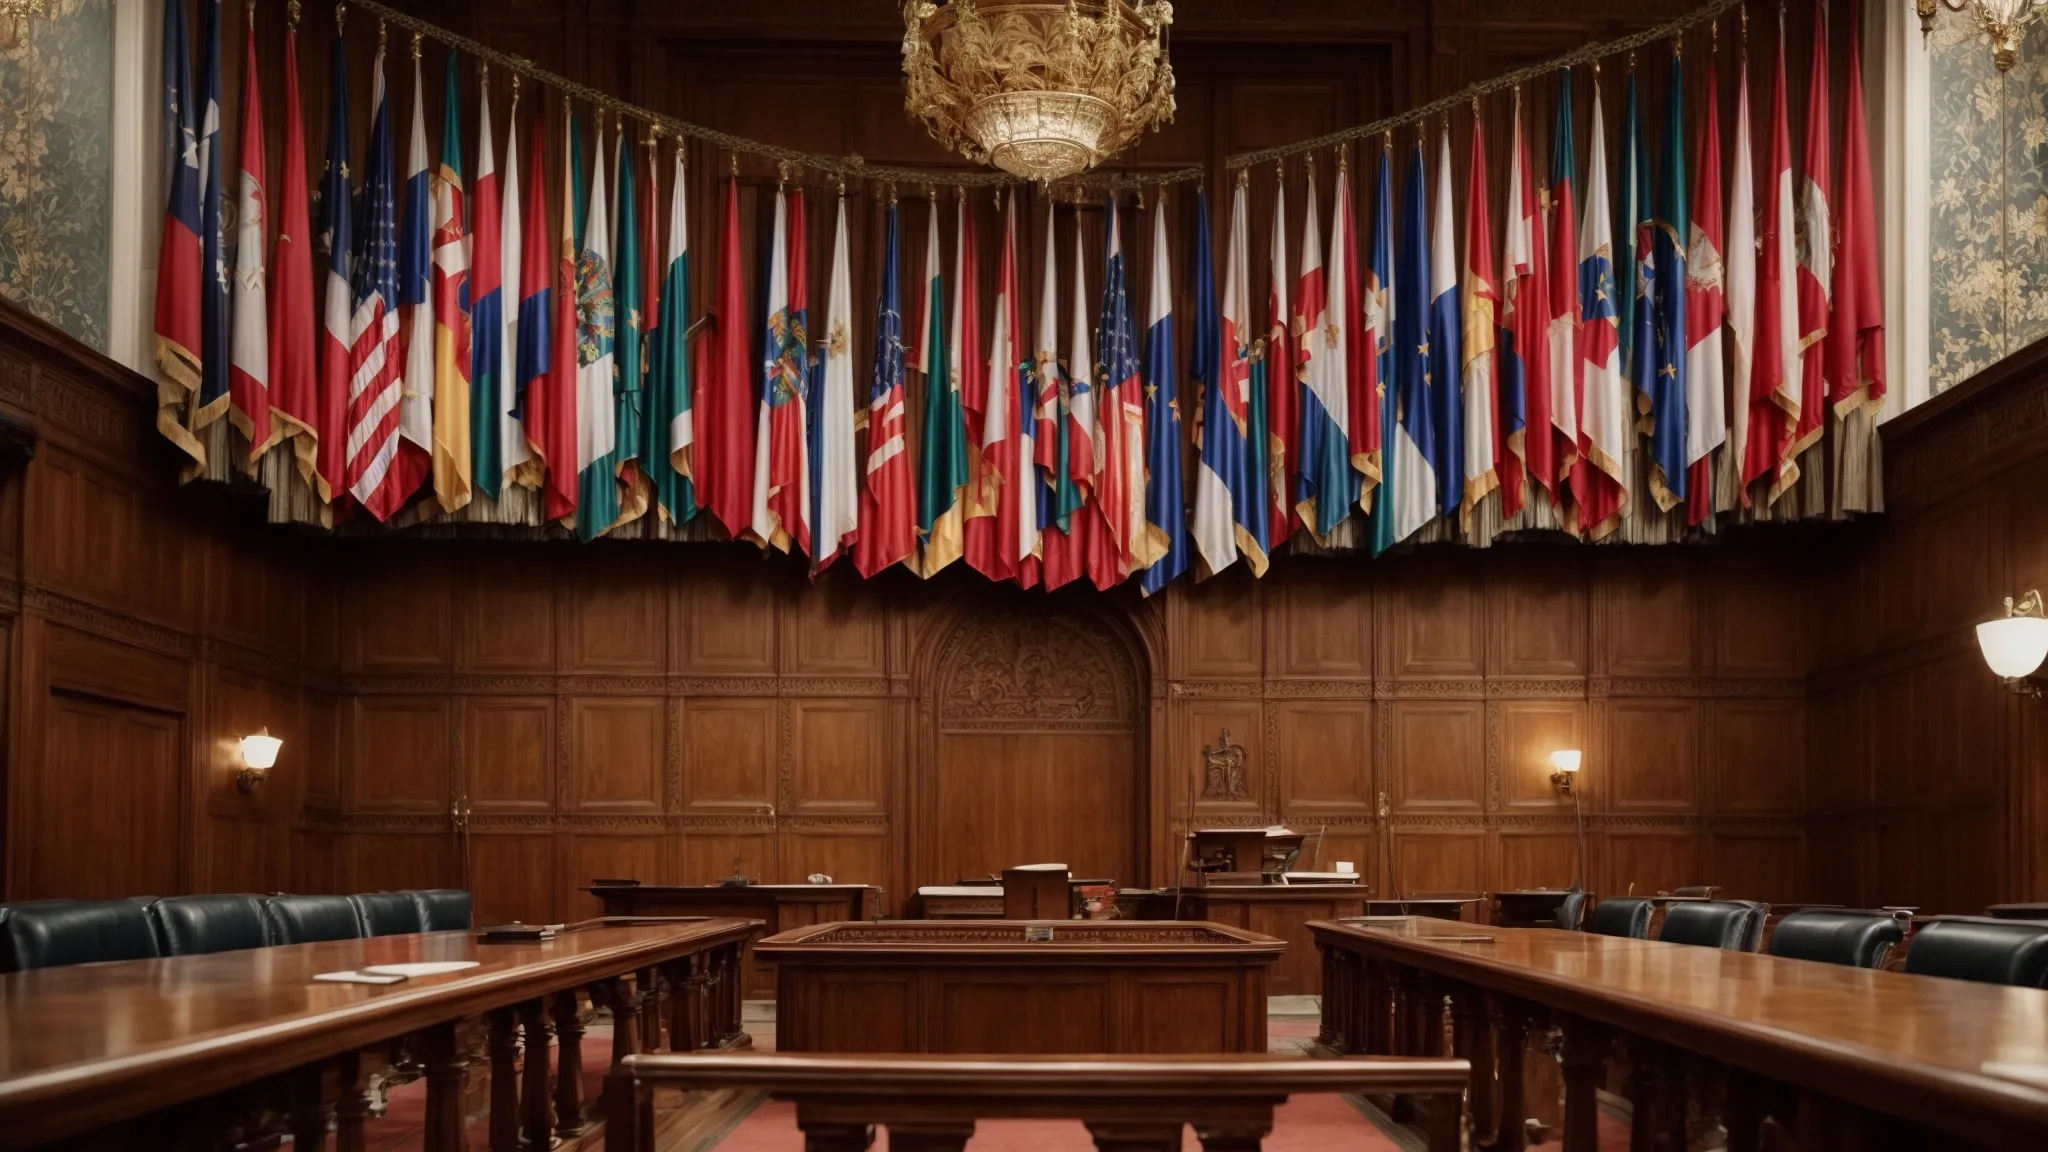 a grand, ornate courtroom with national flags representing various countries.